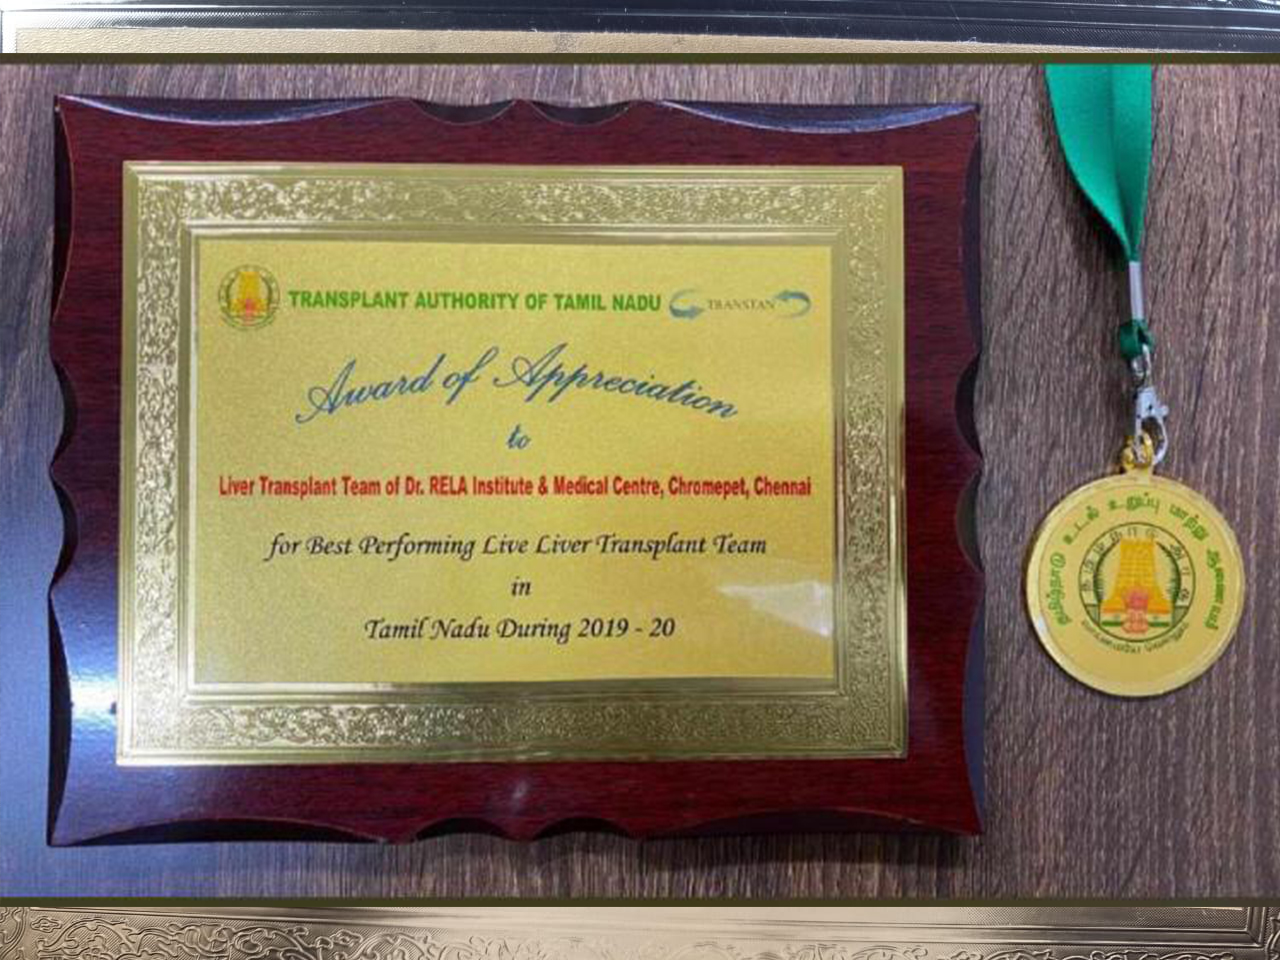 RIMC awarded the Best Performing Live Liver Transplant Team by TRANSTAN